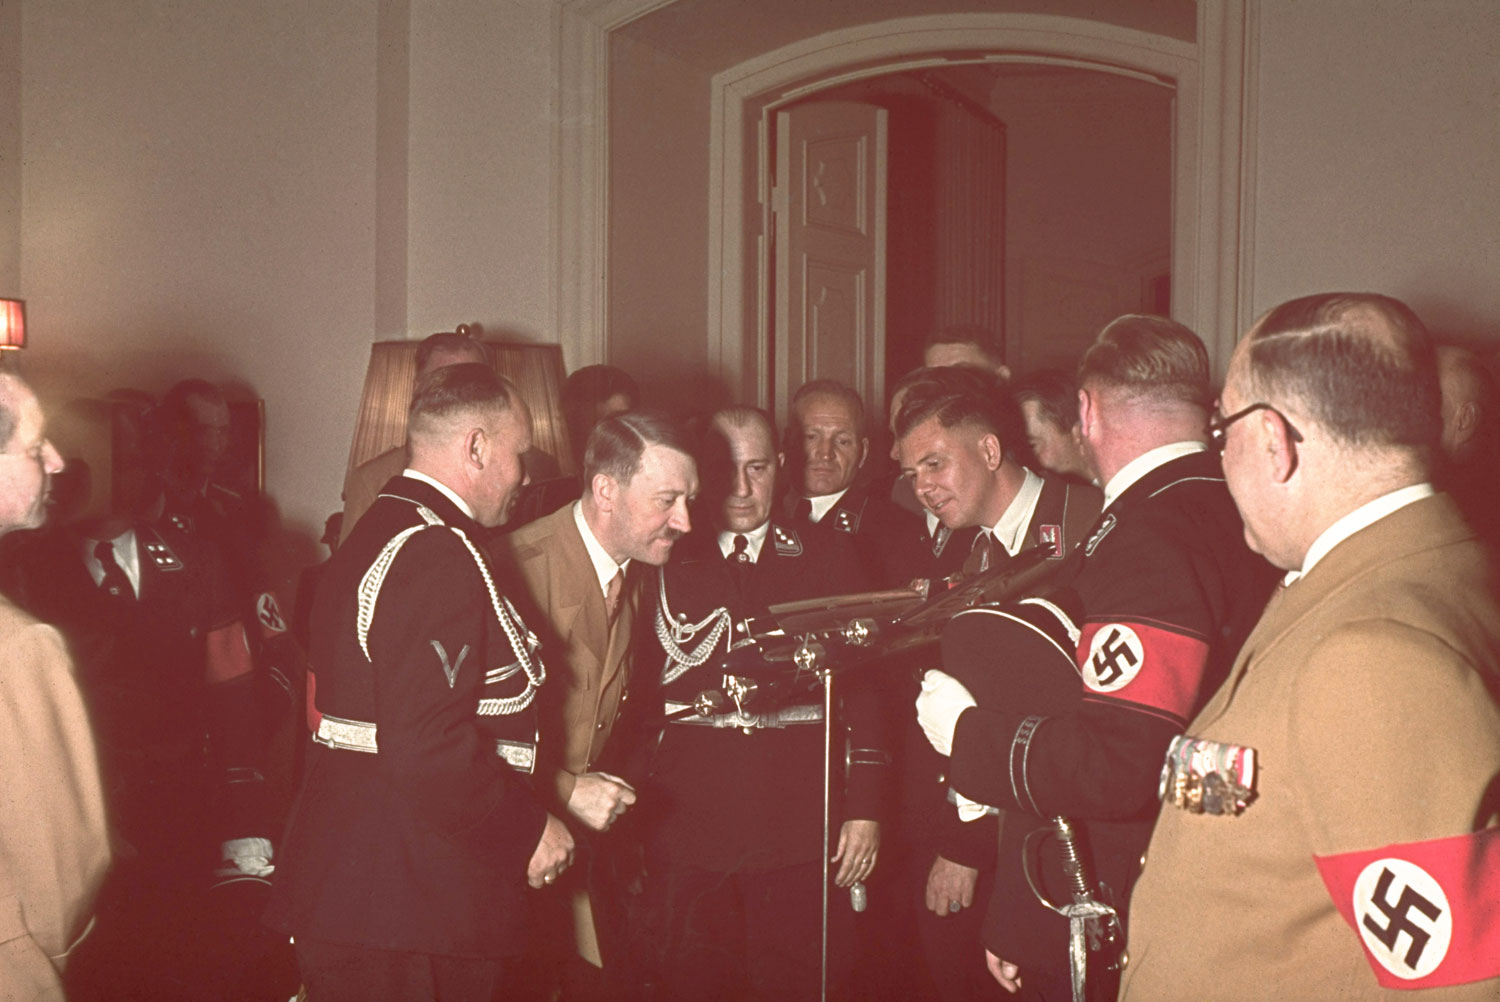 Adolf Hitler receives a model of a Condor airplane as a gift on his 50th birthday, Berlin, April 20, 1939.